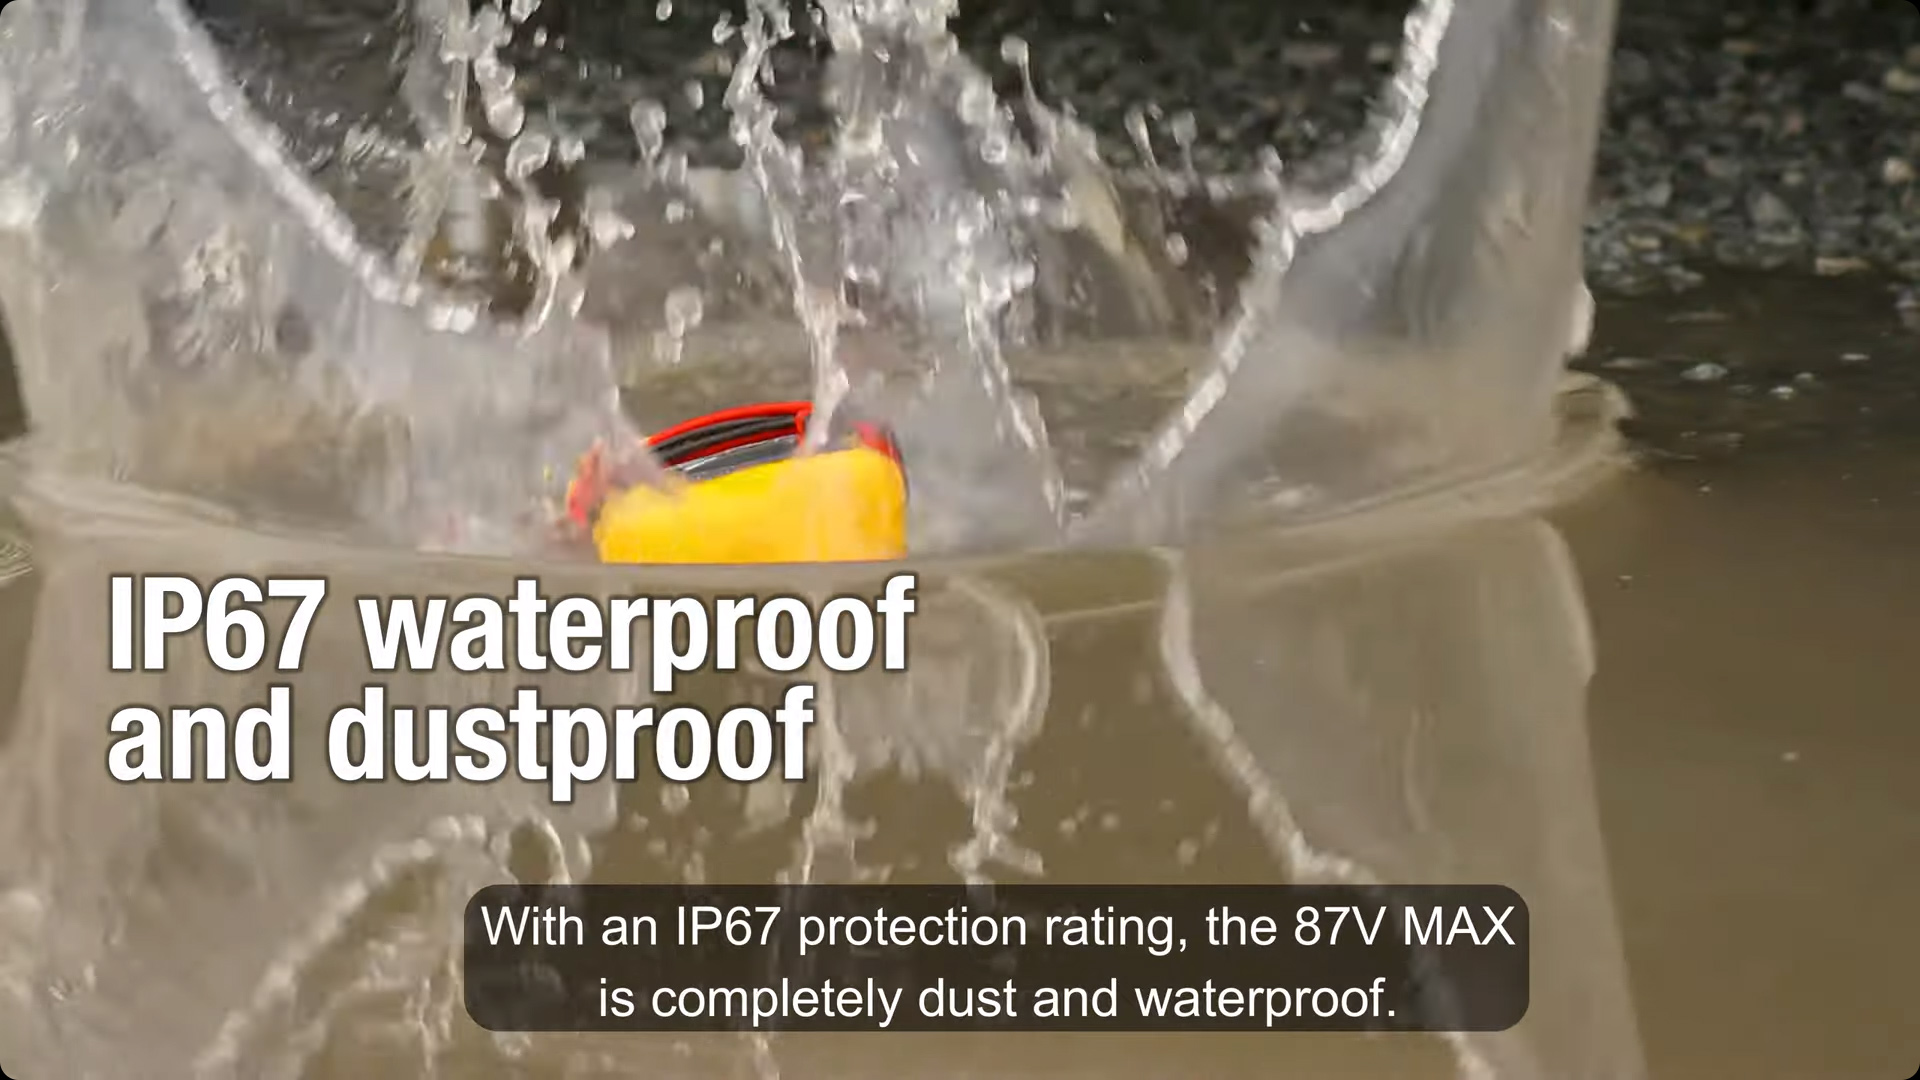 Fluke 87V Max True-RMS Digital Multimeter in a puddle of water to demonstrate its waterproof capabilities.